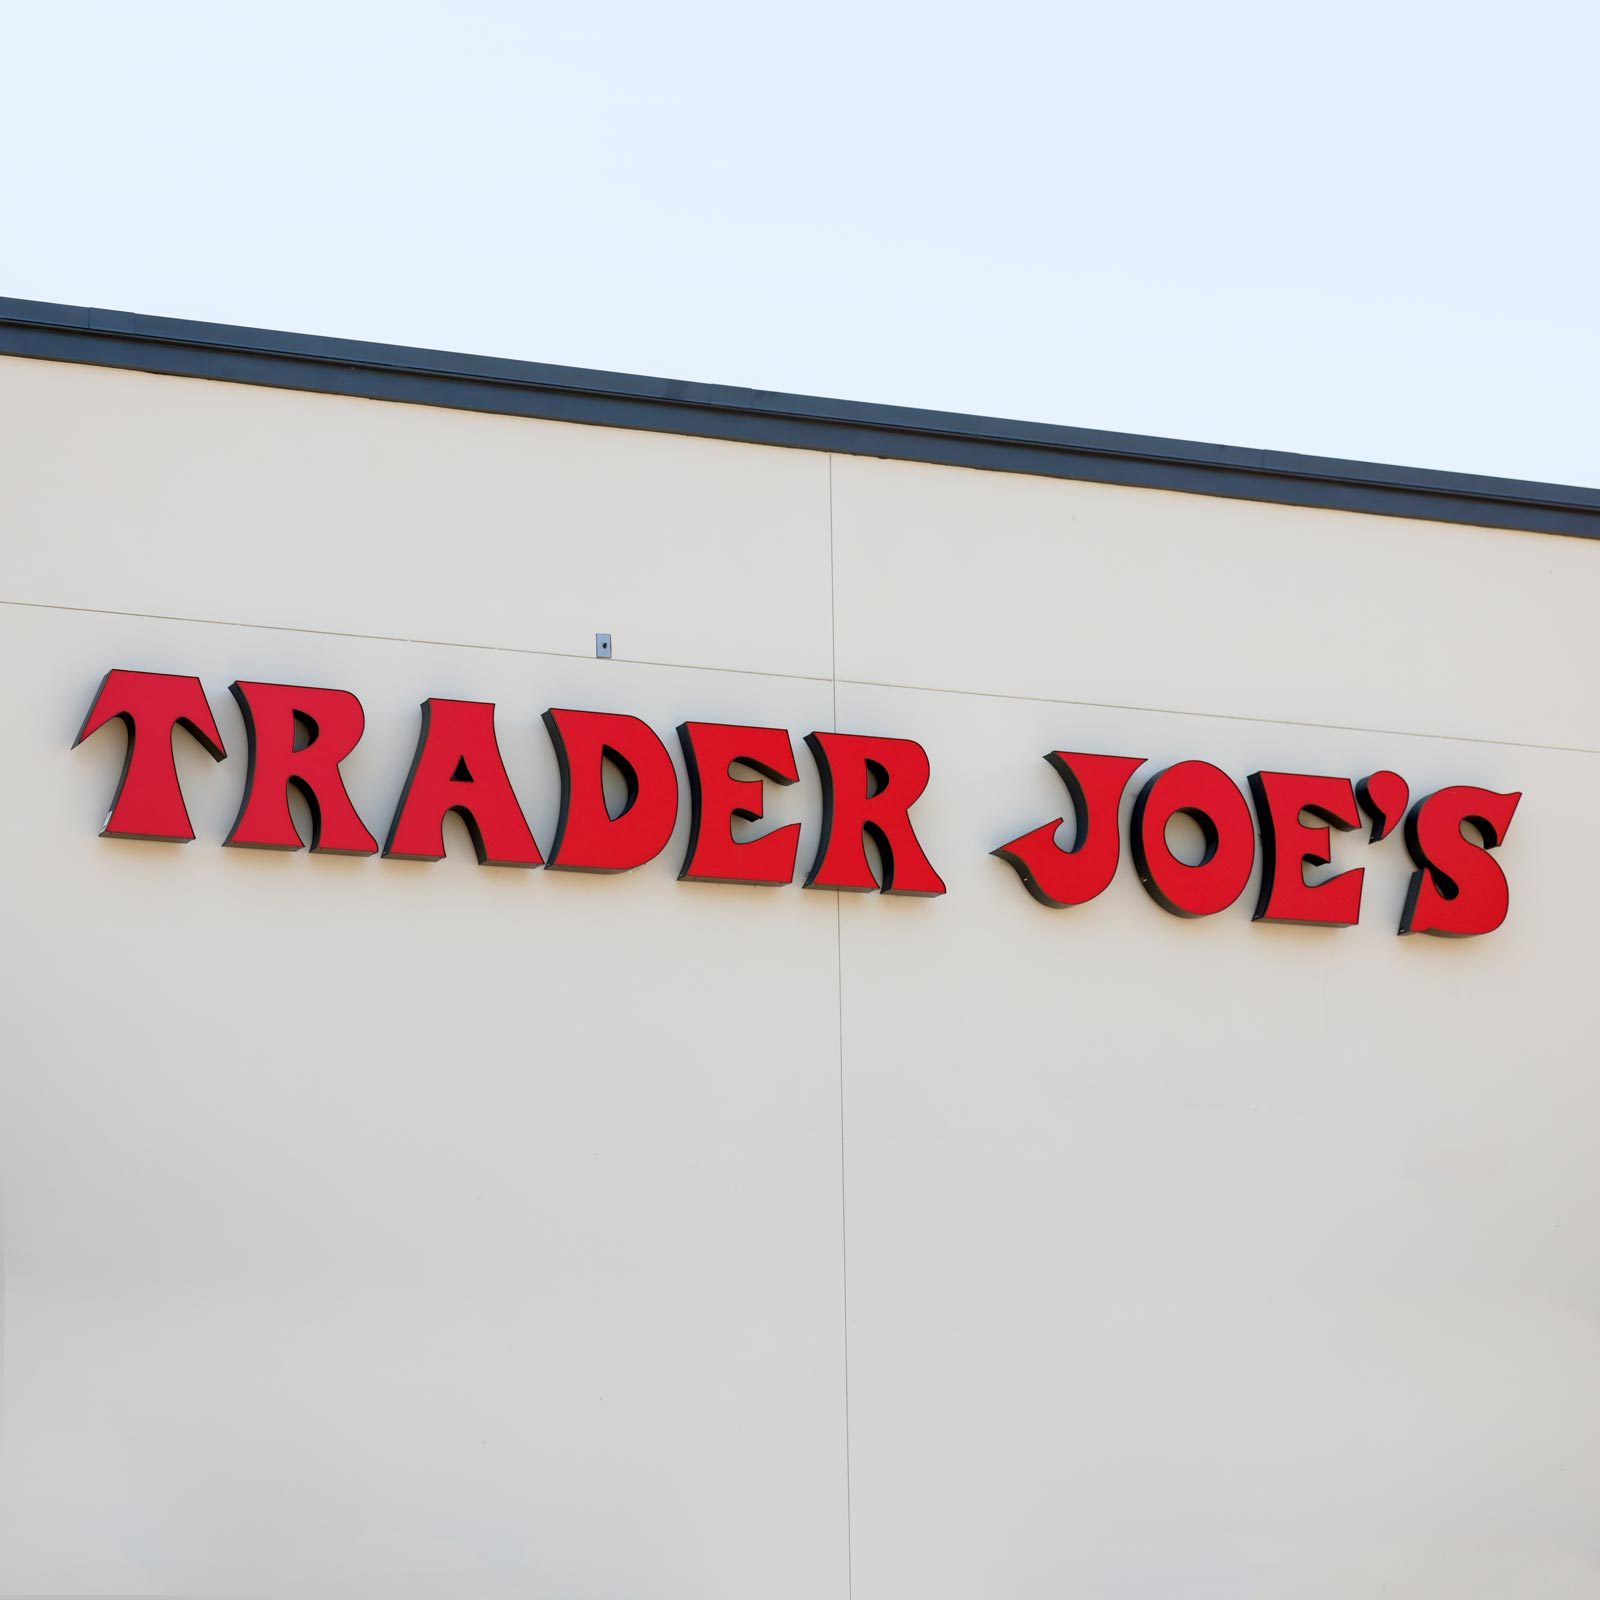 Trader Joe’s Just Recalled 2 Types of Cookies for the Presence of This Foreign Object